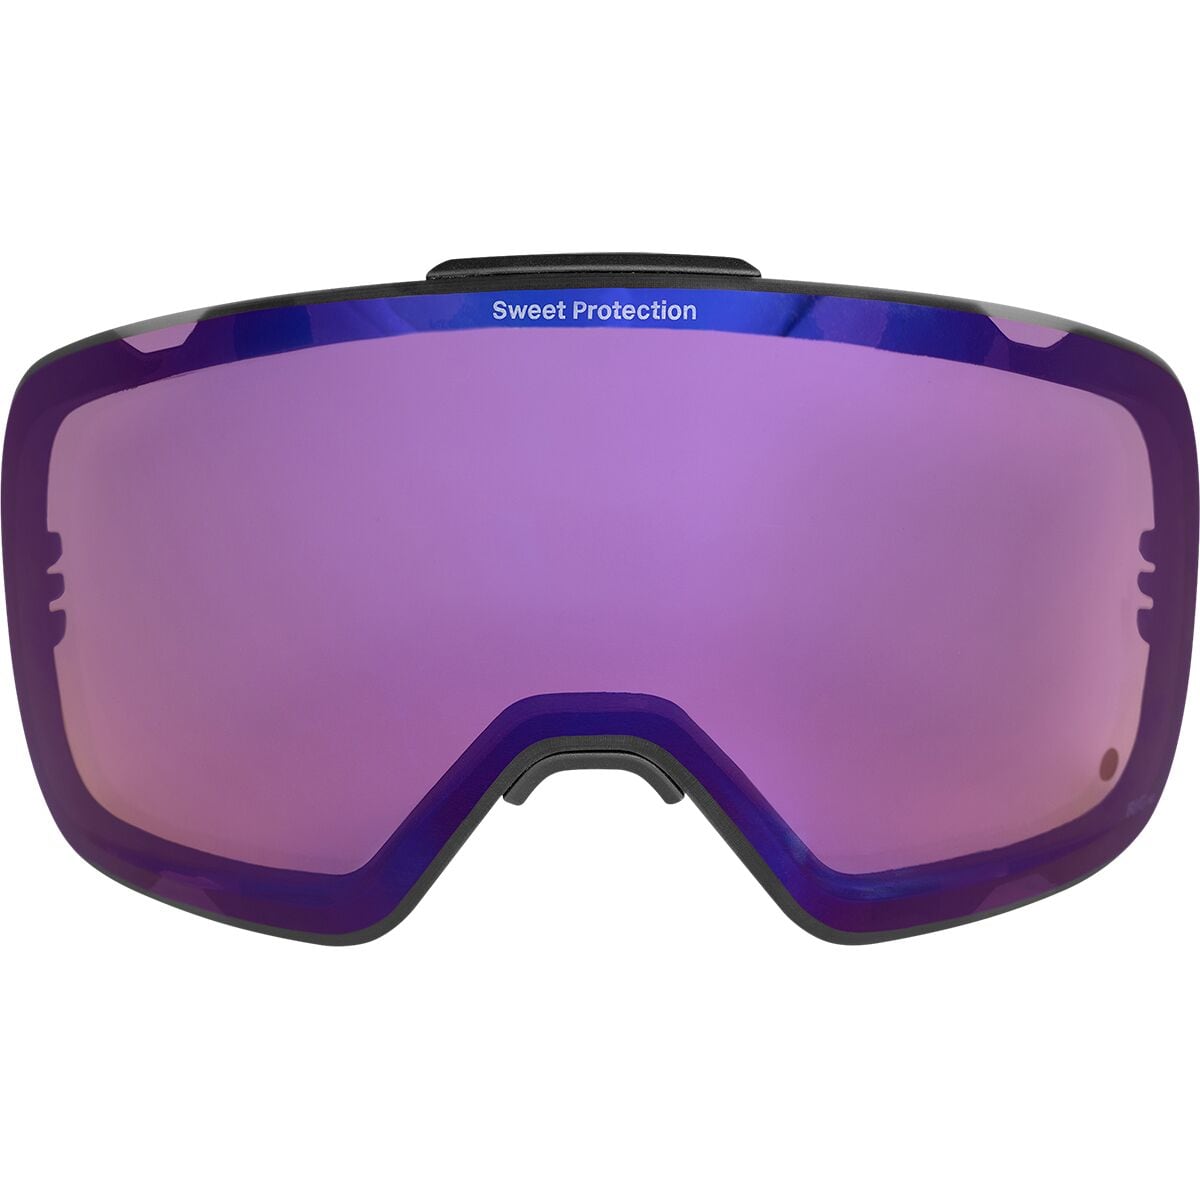 Sweet Protection Interstellar RIG Goggles Replacement Lens